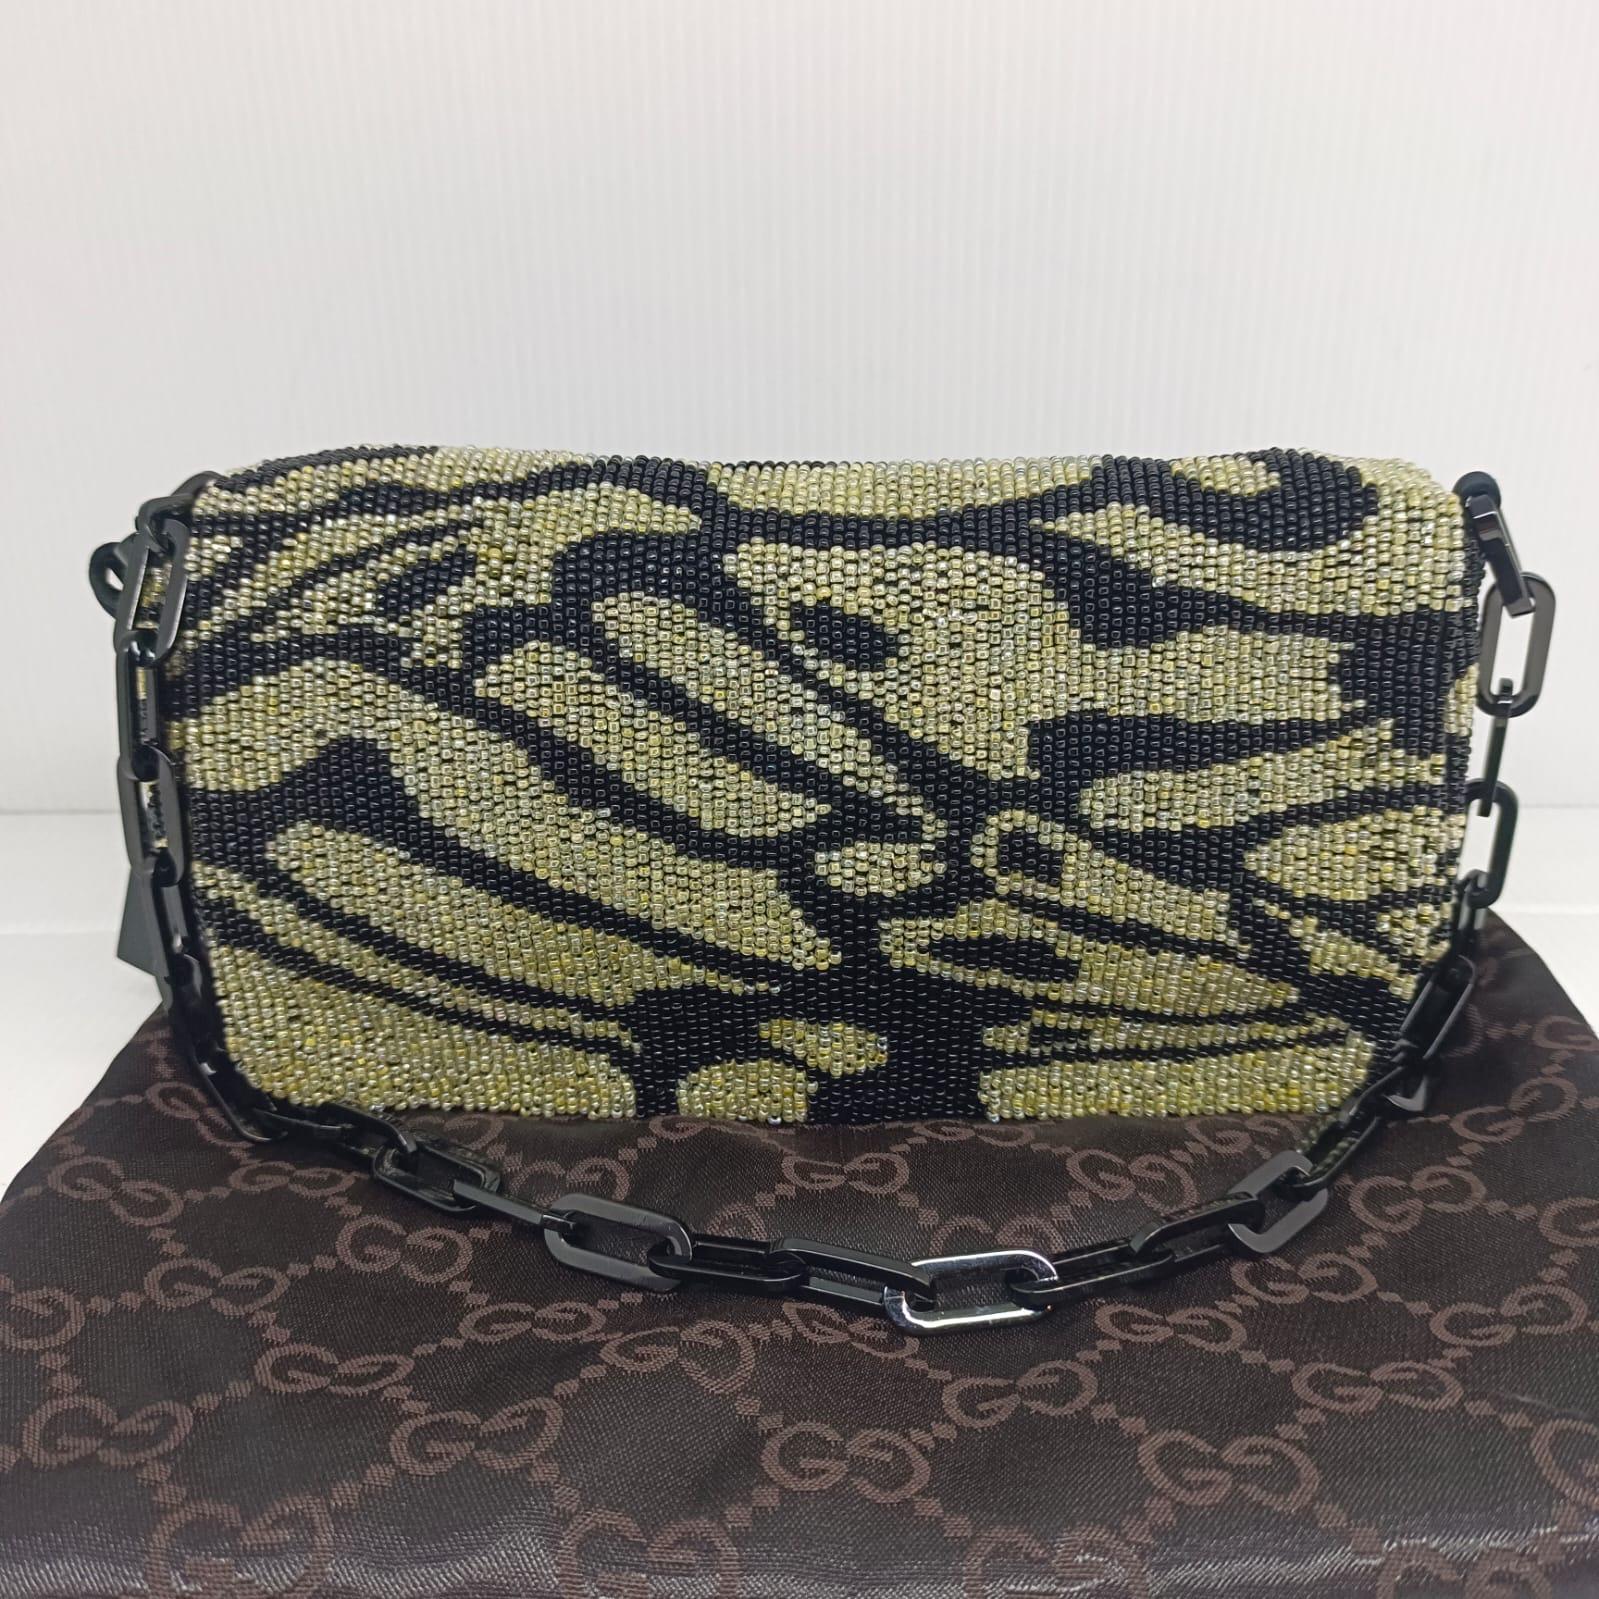 Iconic gucci by Tom Ford collection. Zebra beaded evening bag with black chain. Slight yellowing on the beads but still blends in well with the bag. Silk lining. Comes with dust bag.